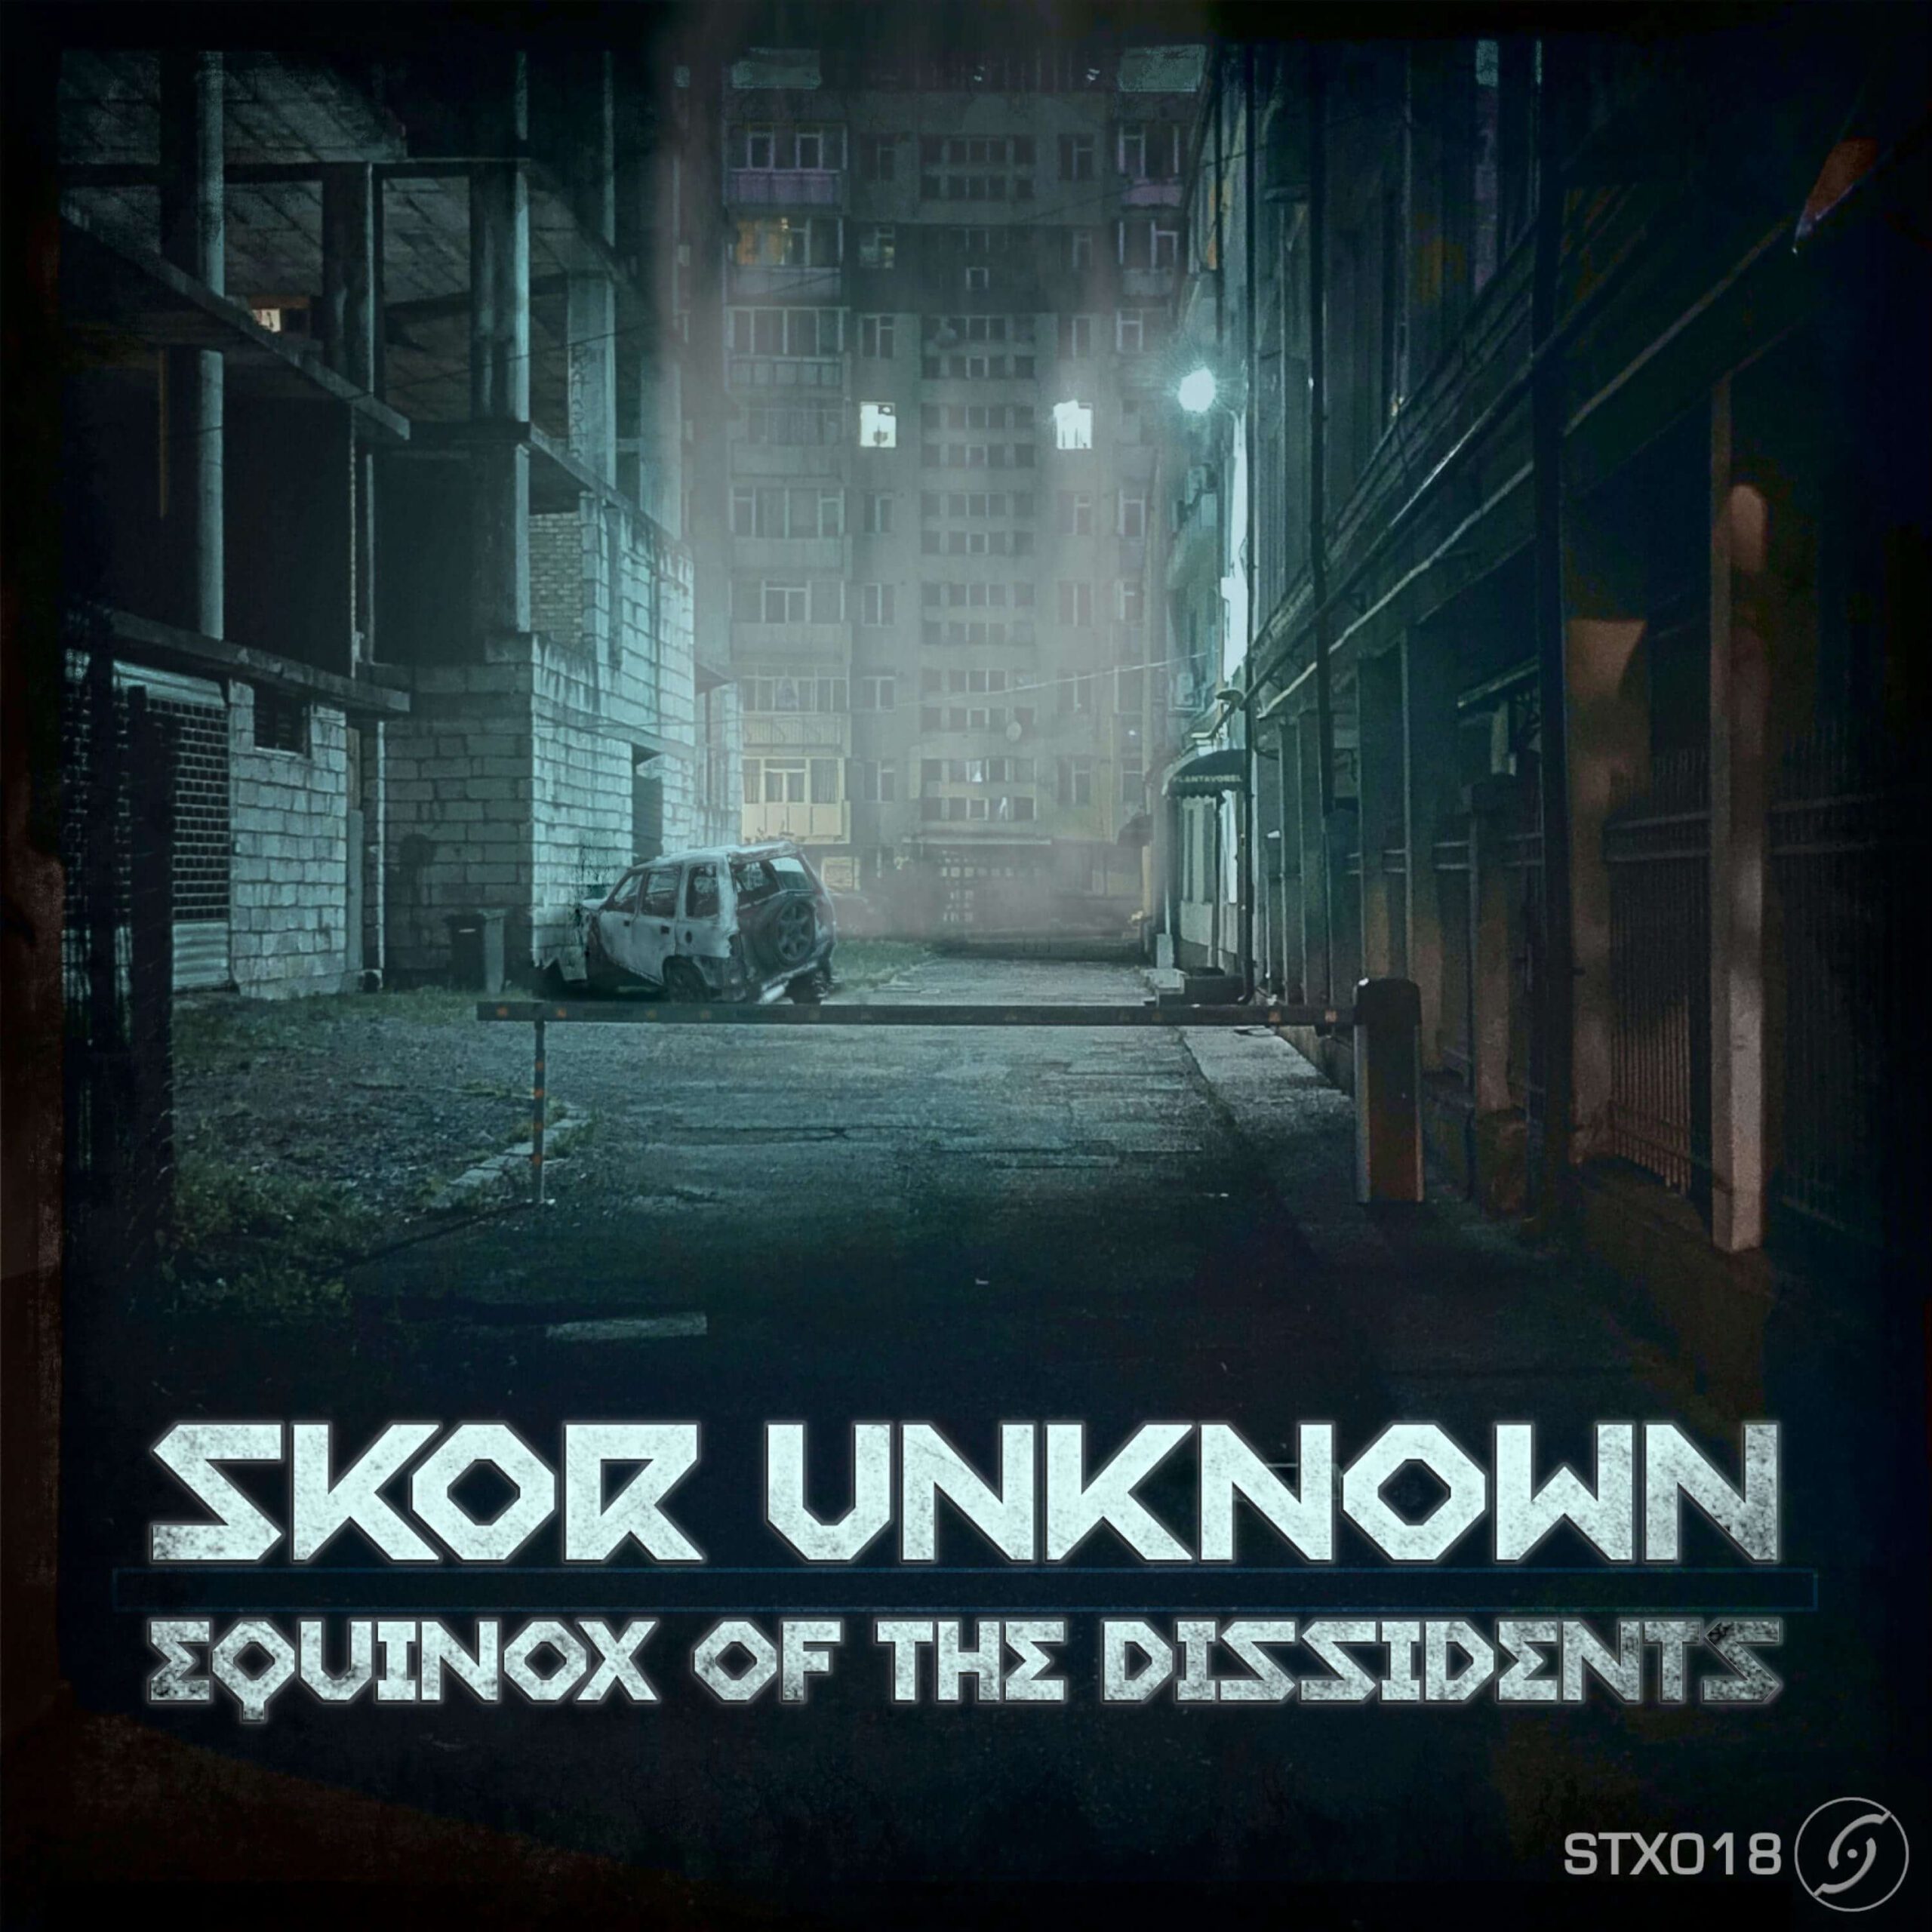 equinox-of-the-dissidents-cover-art